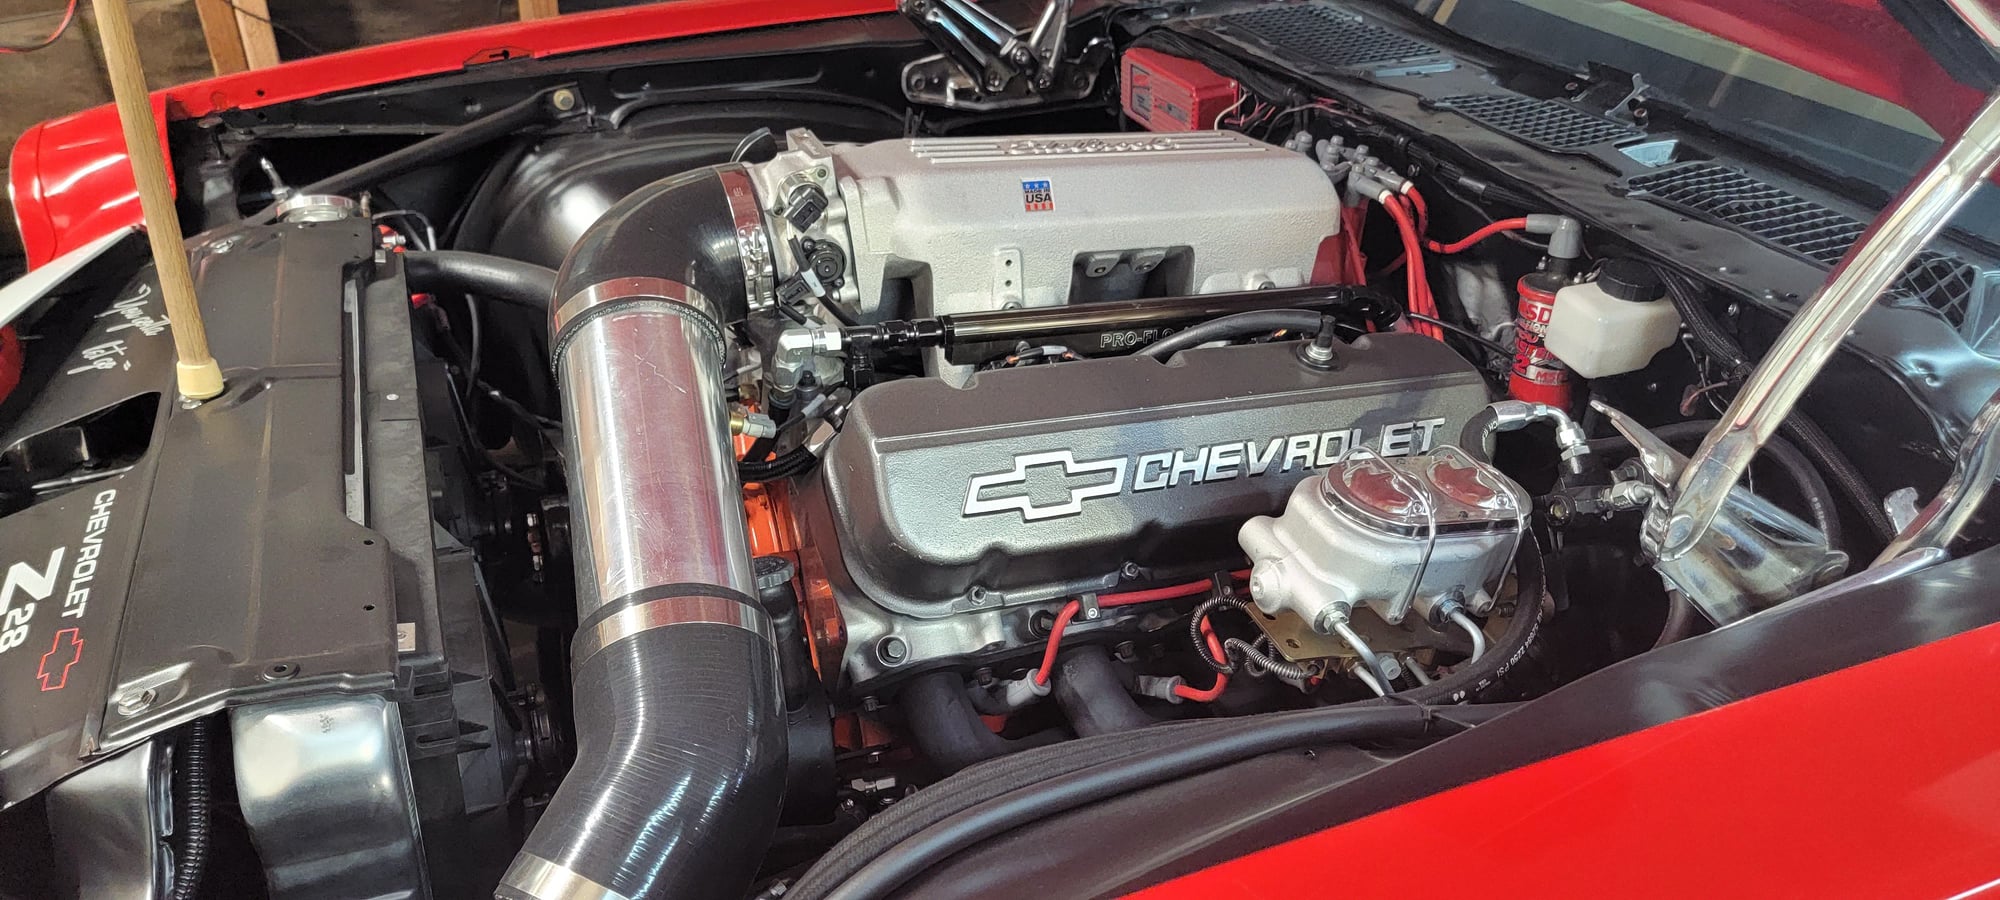 Engine - Complete - Fuel injected 489 600+hp - Used - 1966 to 1974 Chevrolet Chevelle - Bakersfield, CA 93308, United States